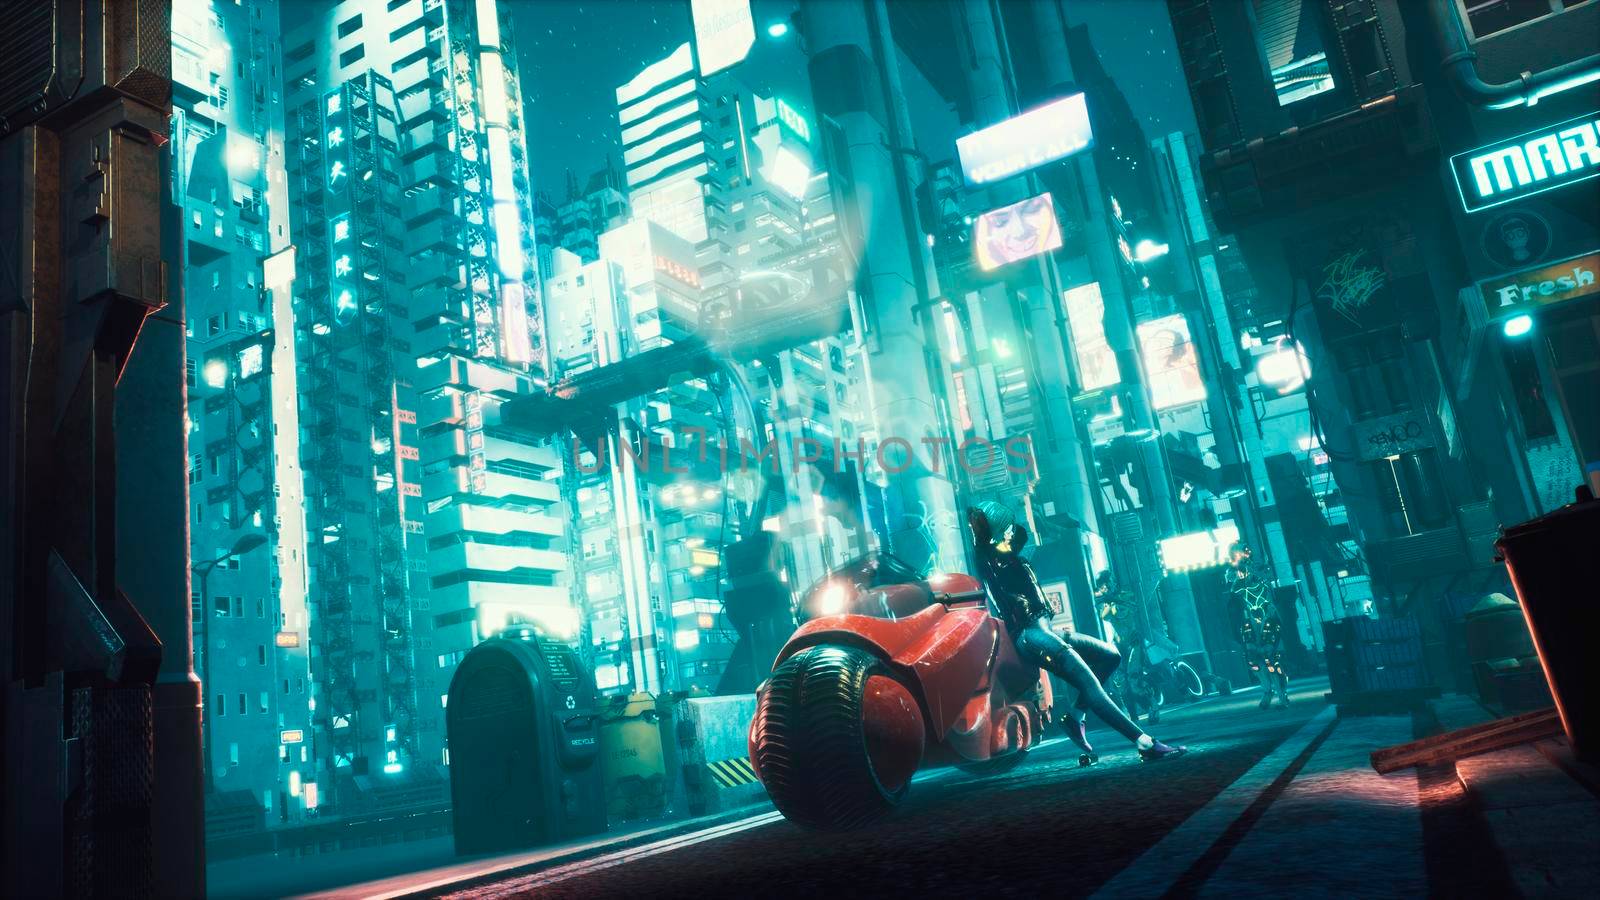 Police robots are slowly approaching the cyber girl standing next to her futuristic motorcycle. View of an future fiction city. 3D Rendering. by designprojects